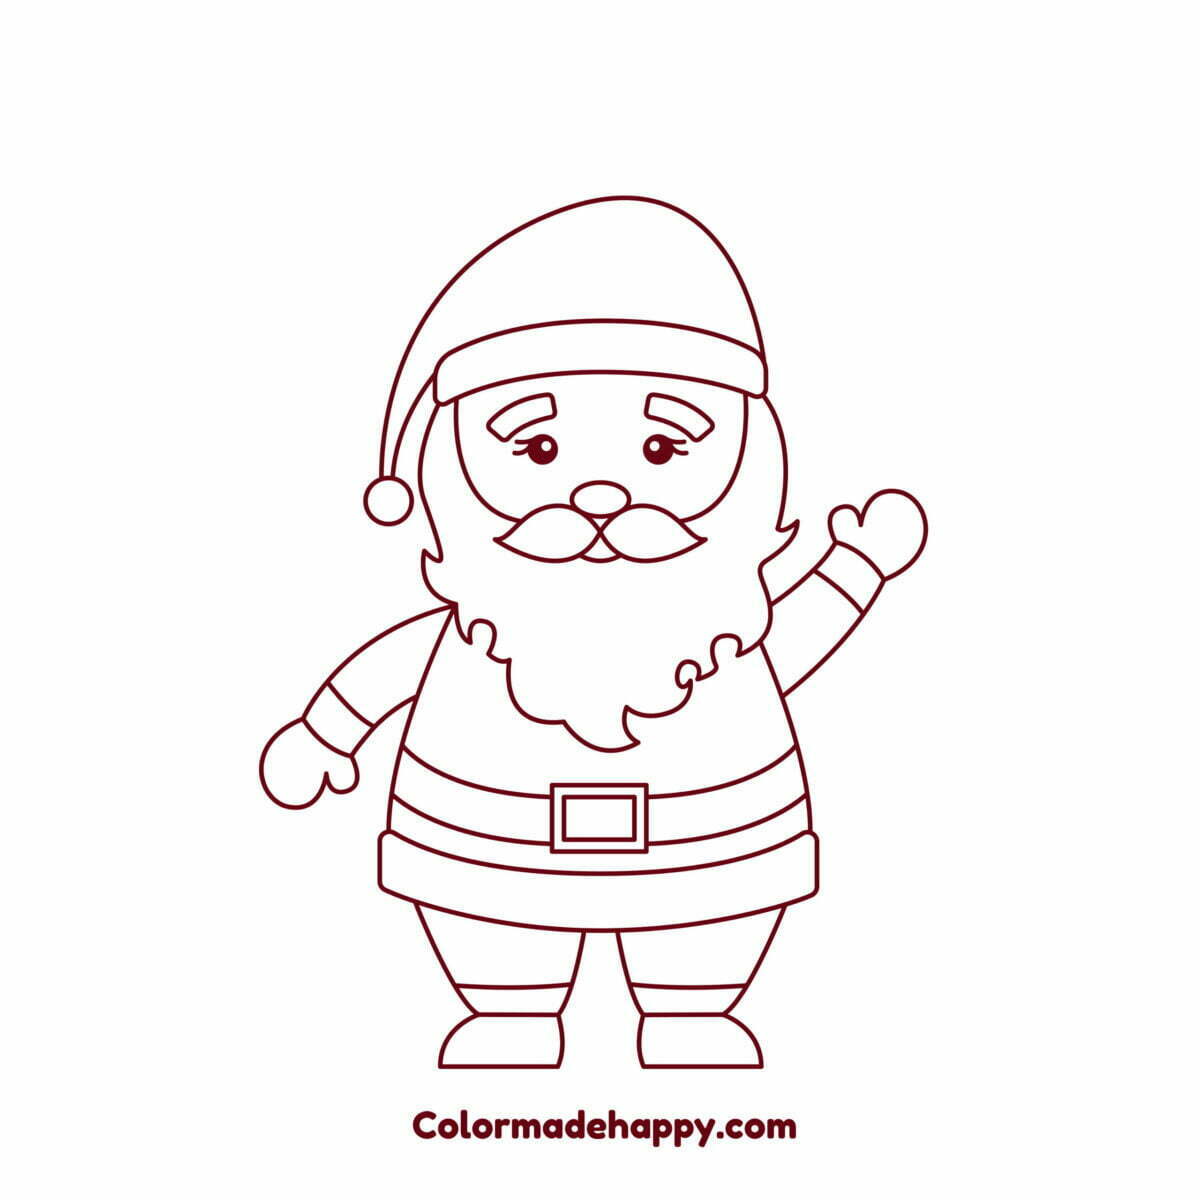 How to draw Santa completed drawing